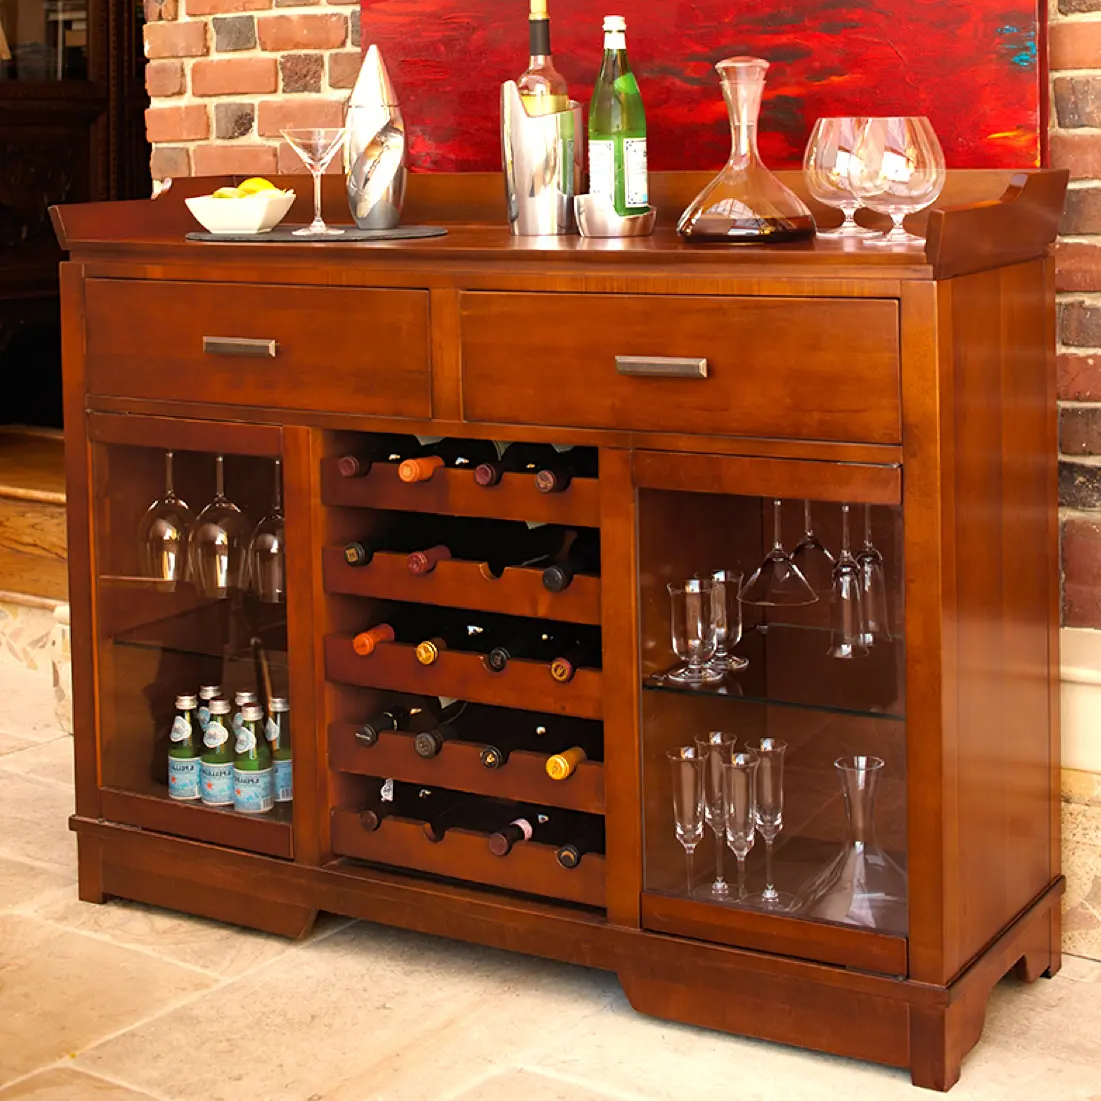 Click here to see more wine furniture